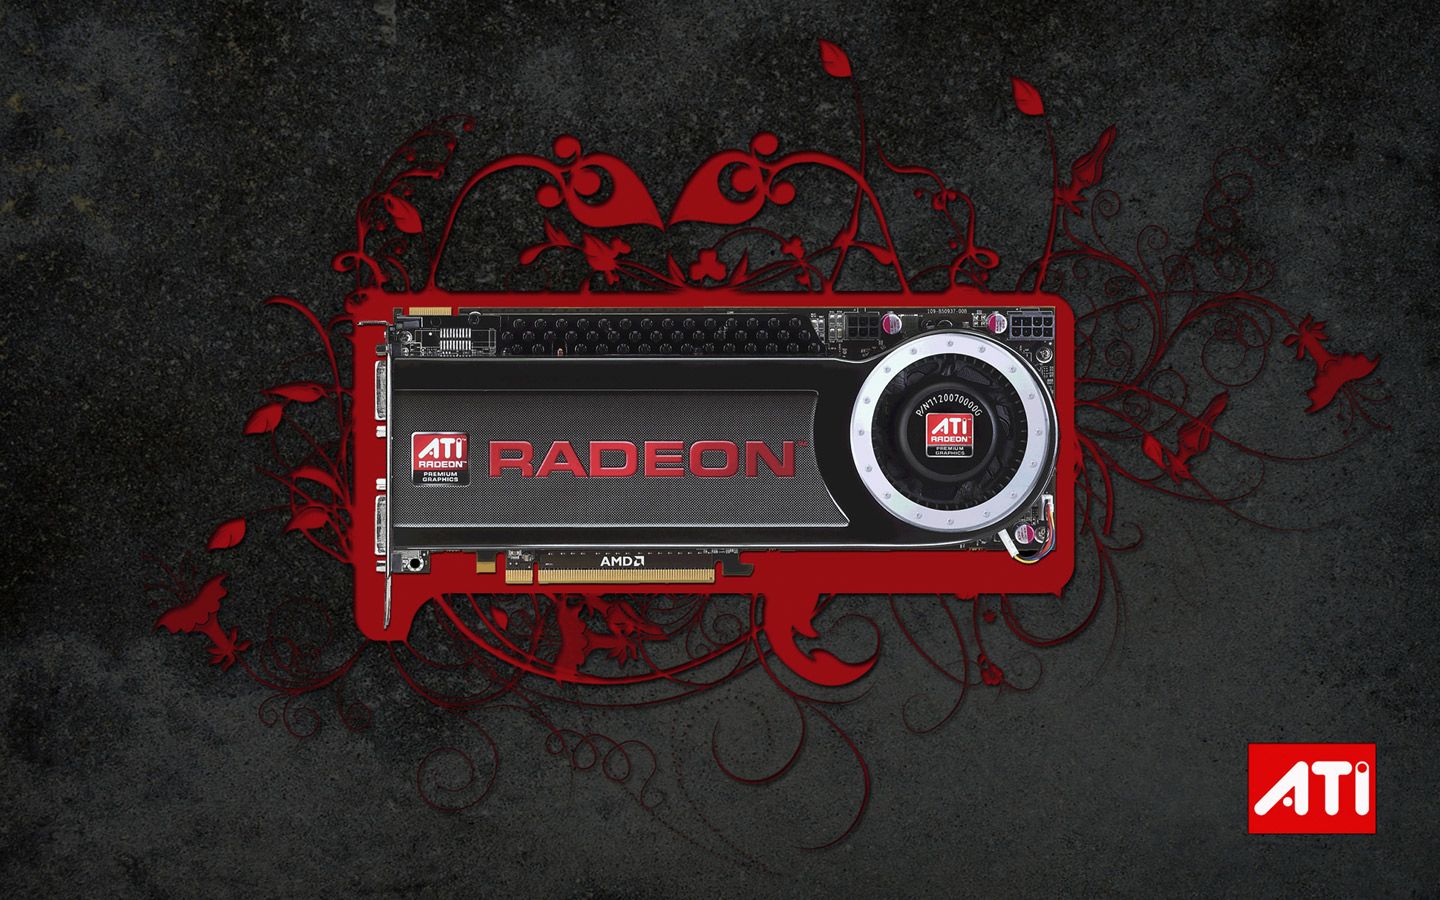 Looking for some slick AMD wallpapers